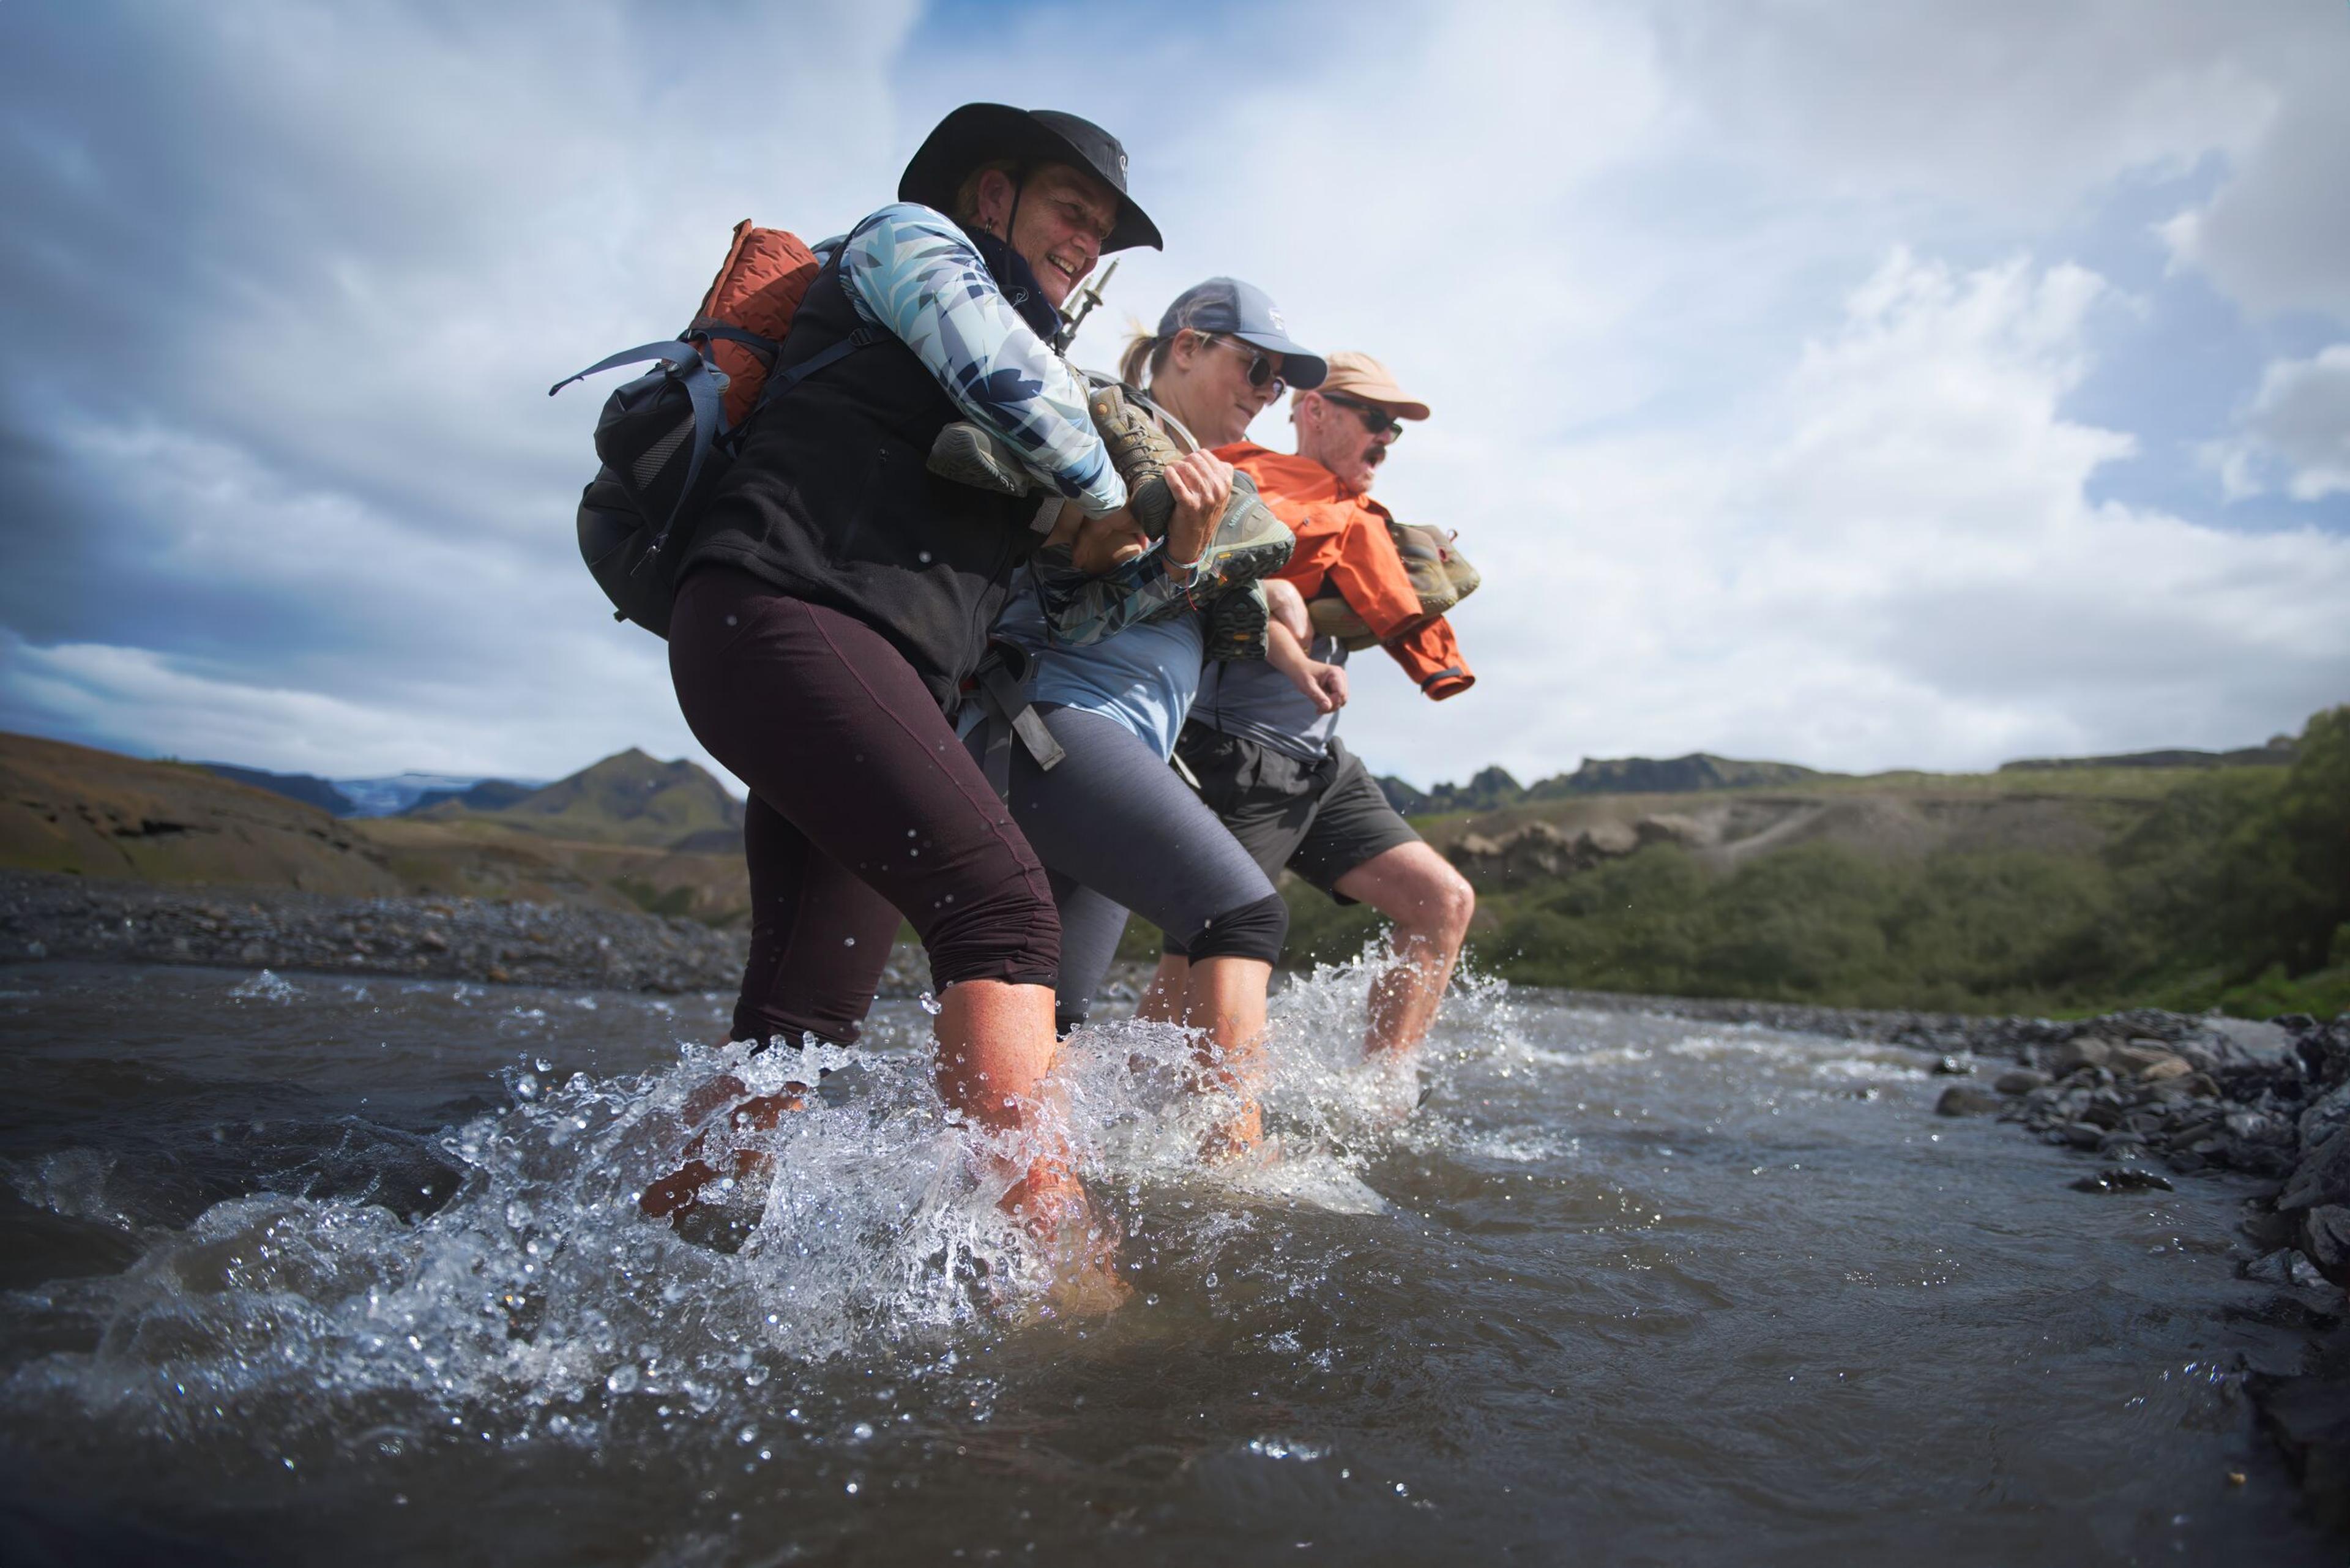 Three hikers carefully crossing a river on foot, holding onto each other for support.